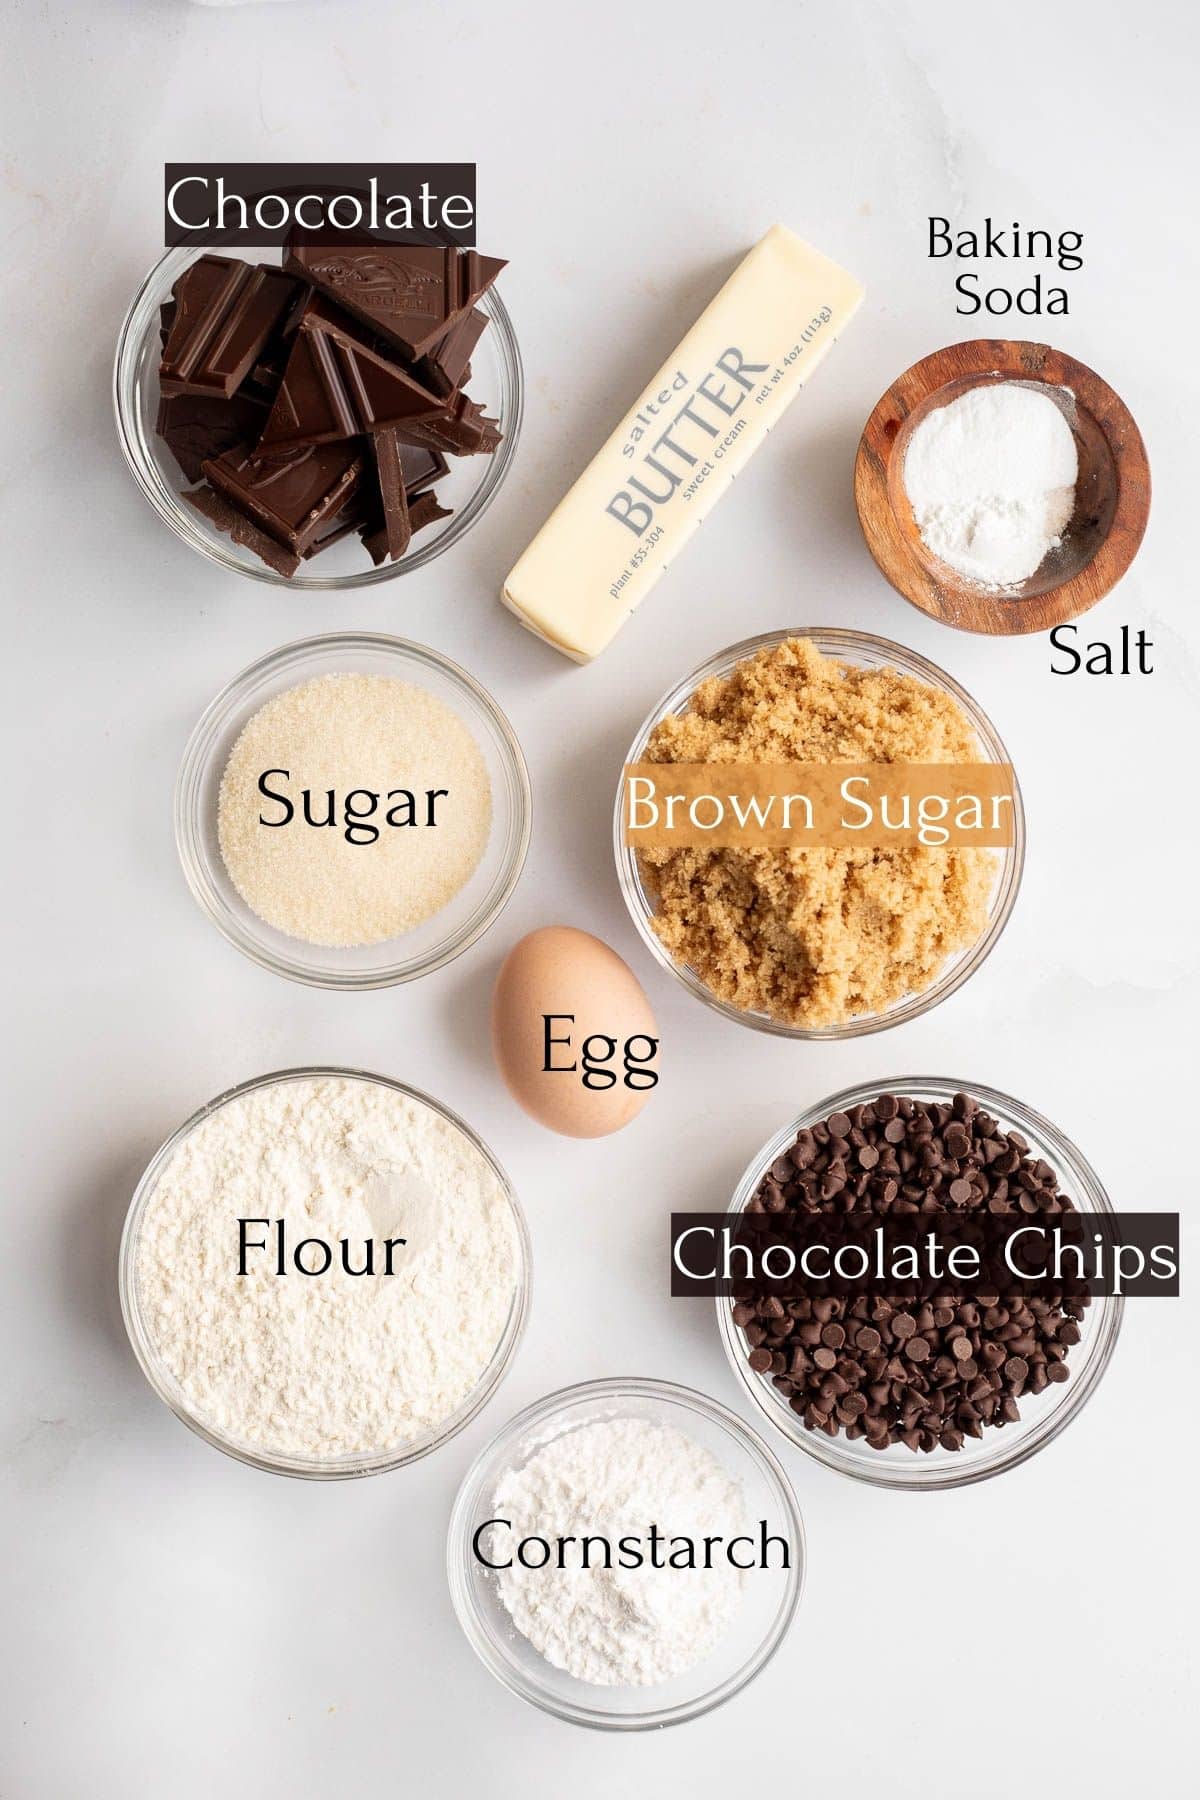 ingredients to make chocolate filled cookies labeled with black text.